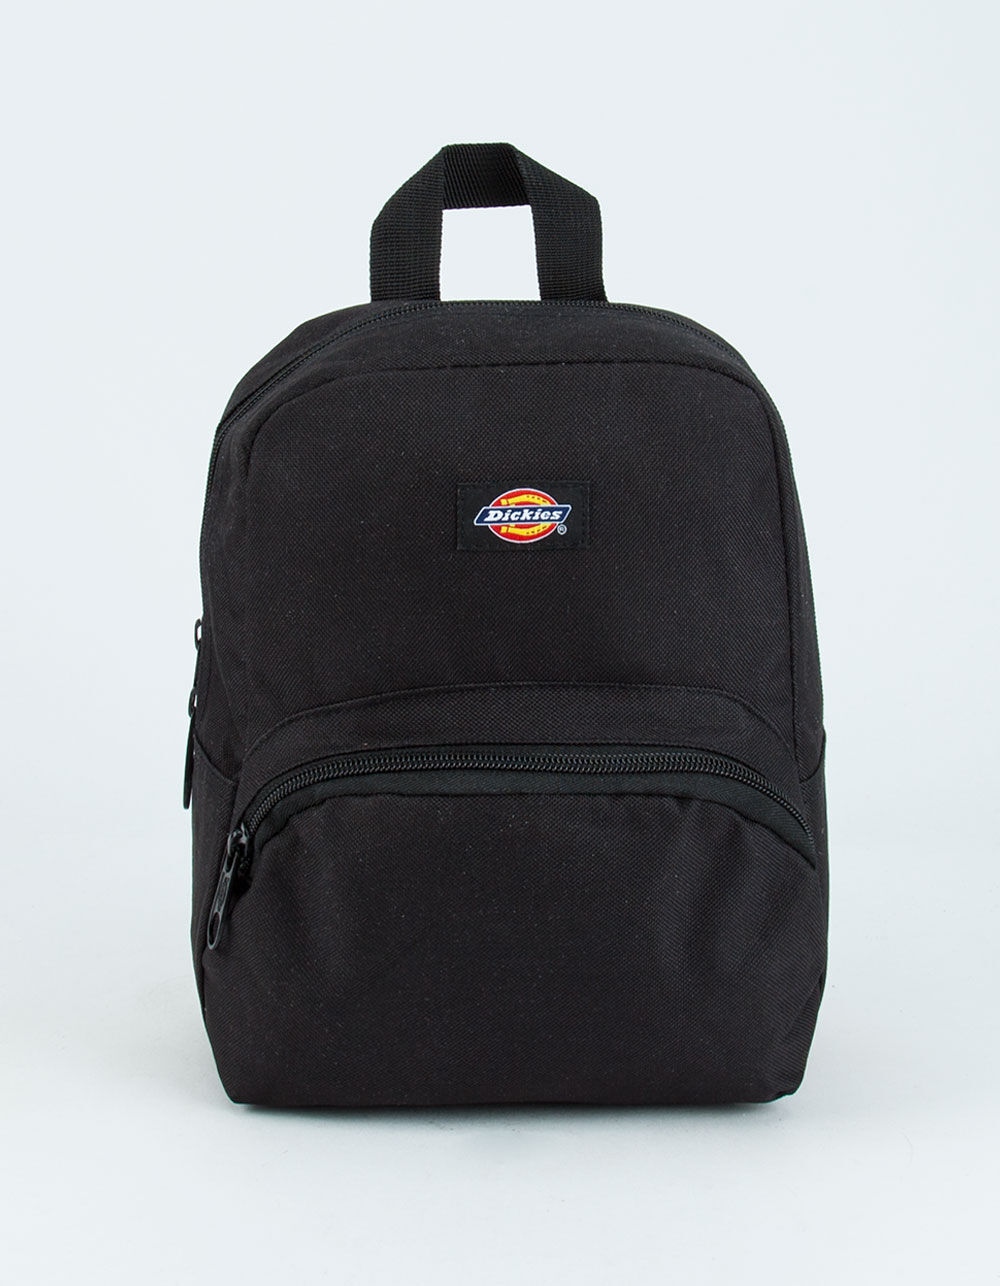 Dickies Mini Red White Checkerboard Backpack